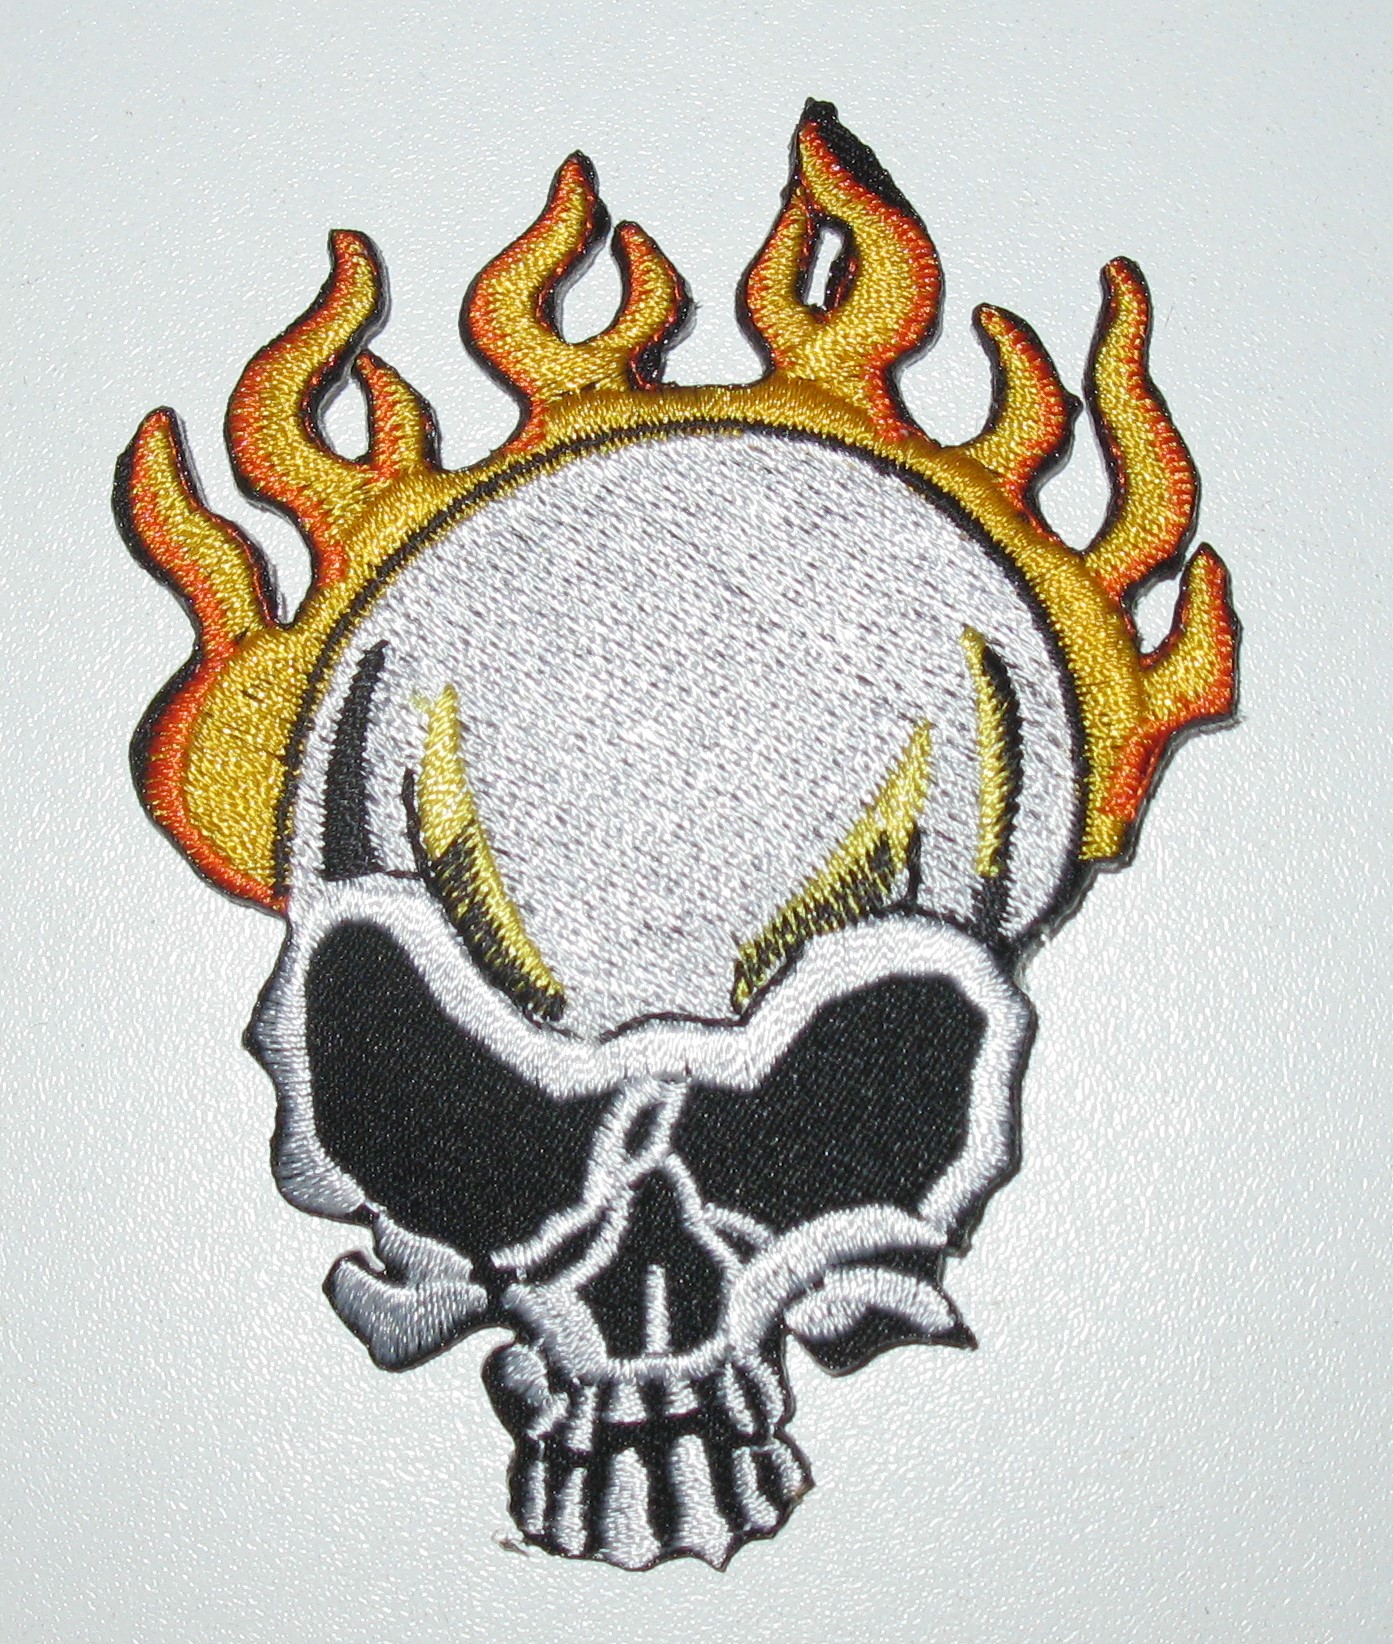 PATCH THERMOCOLLANT TETE DE MORT FLAMME COLLECTOR95 - Collector95